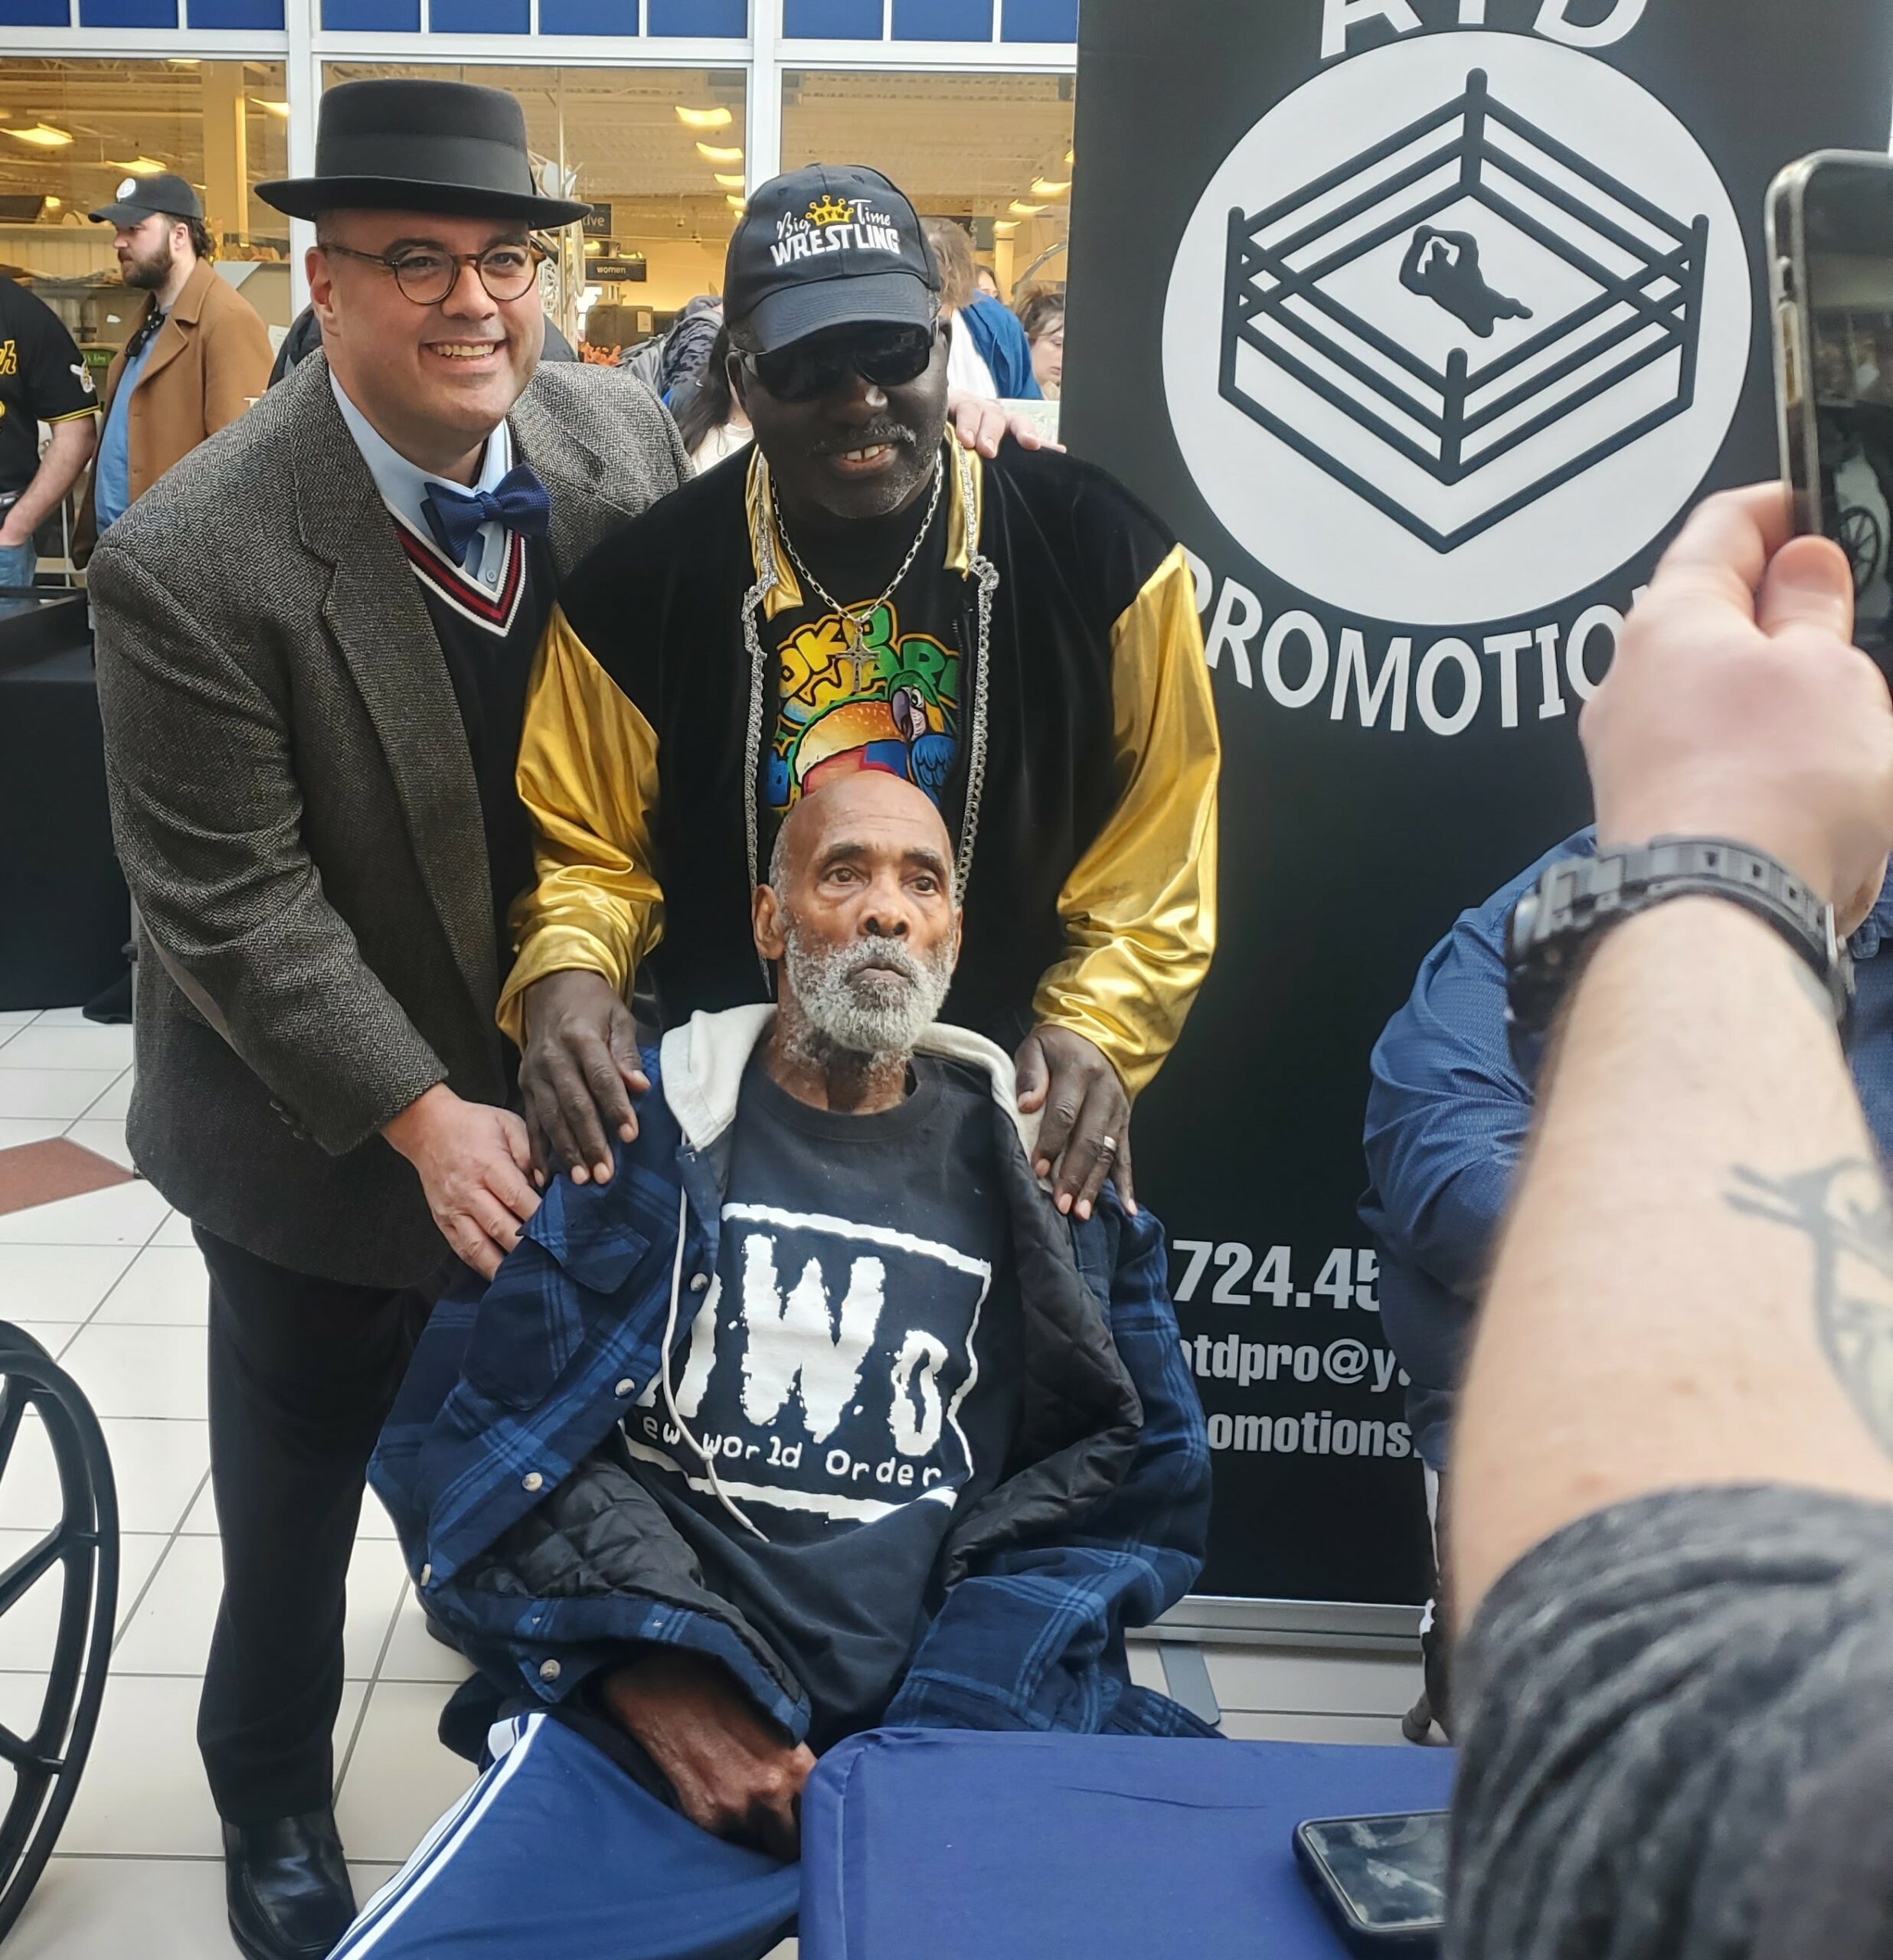 Mark Charles III, Koko B. Ware and (seated) Mike "Virgil" Jones on February 3 in Washington, PA. This was Virgil's last public appearance. Photo by Tom Leturgey